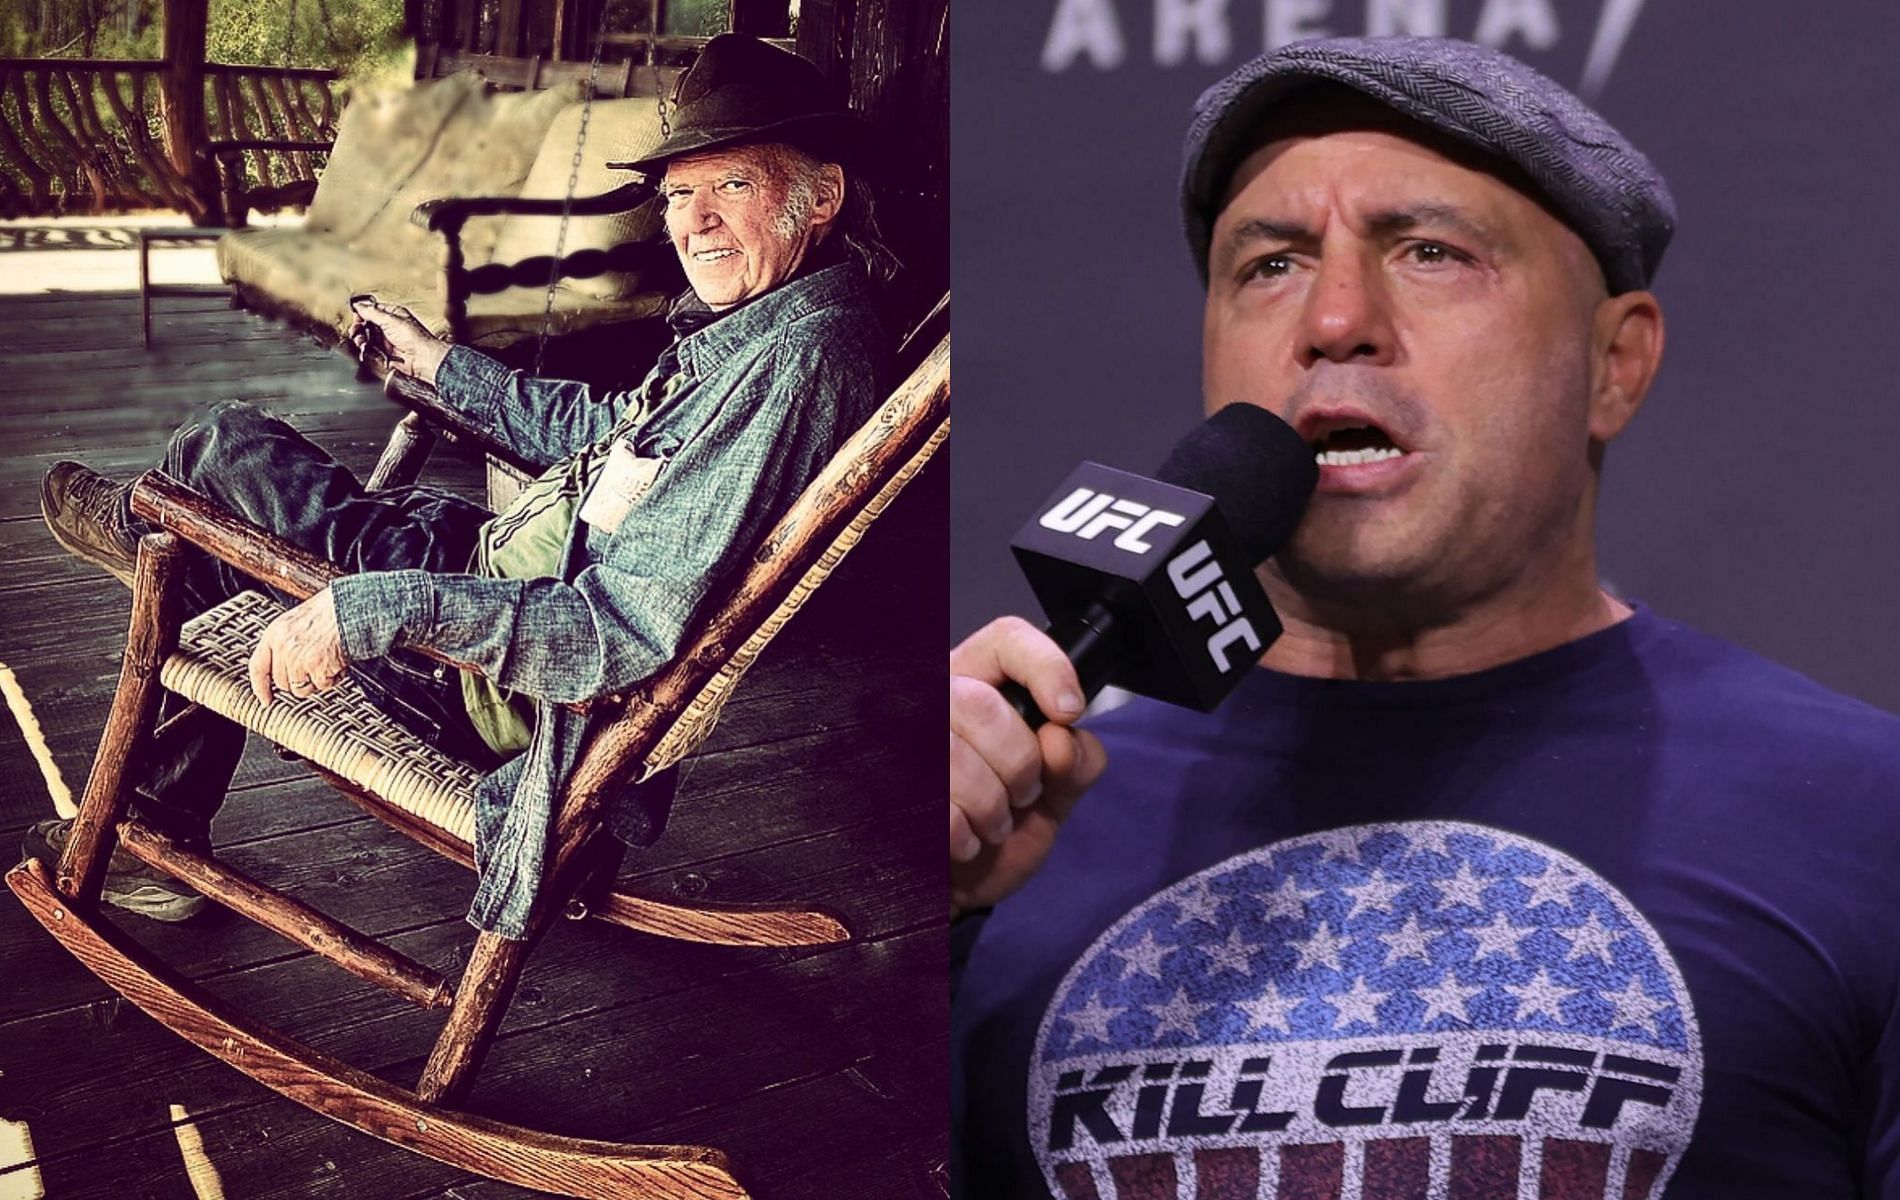 Joe Rogan's Spotify controversy picked up when Neil Young decided to p...